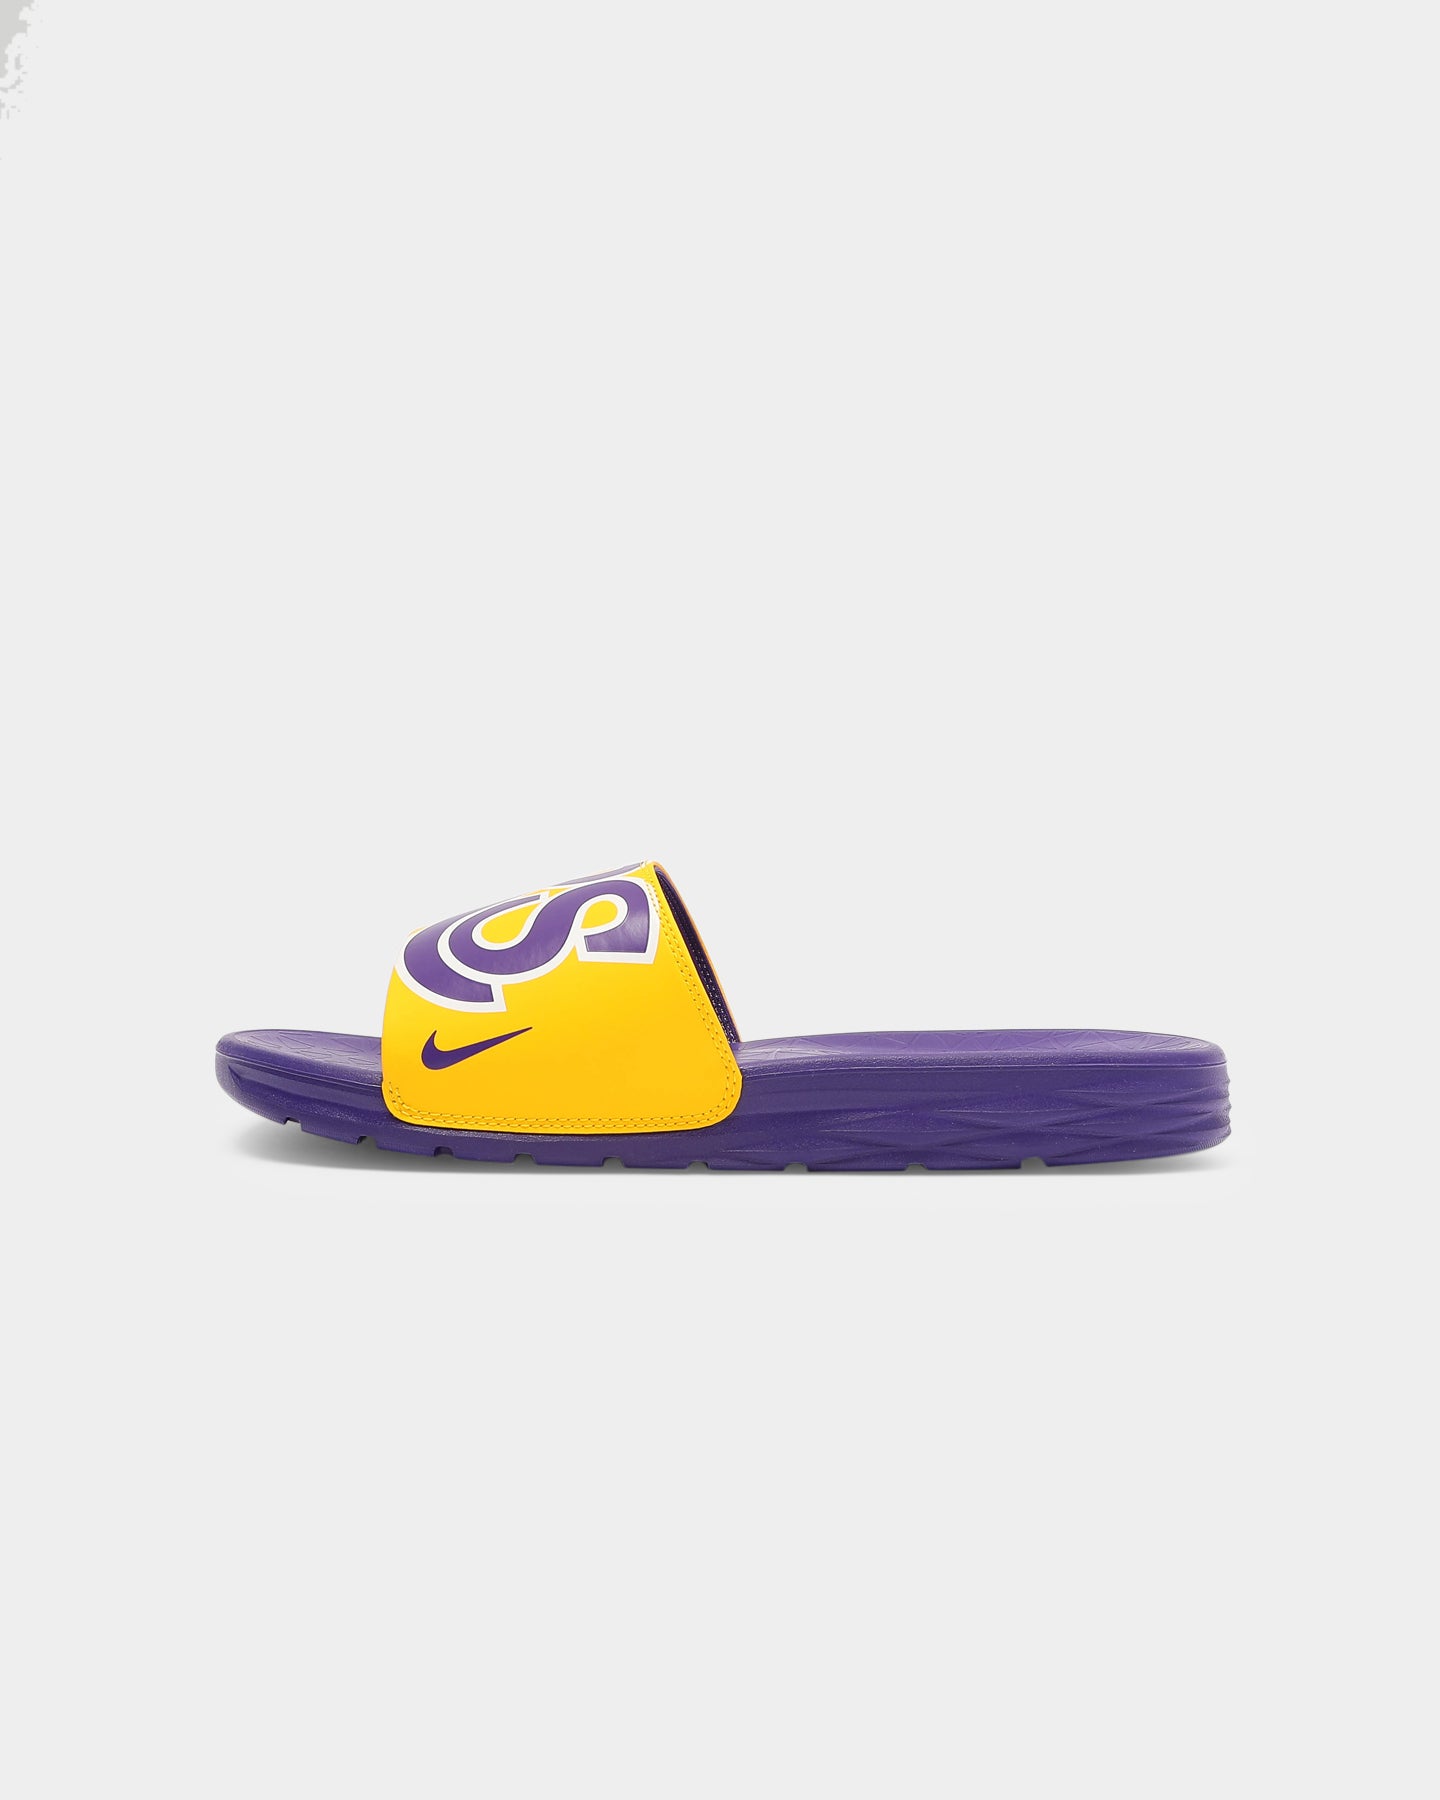 purple nike slides with gold swoosh